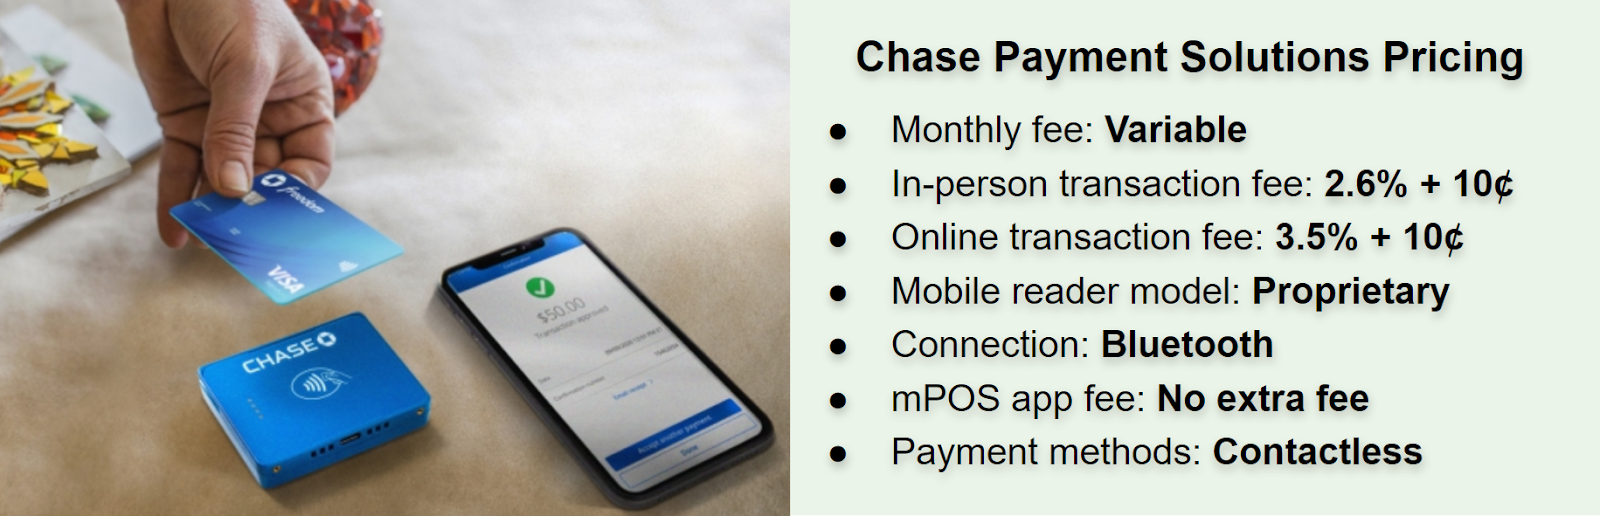 Chase Payment Solutions summary